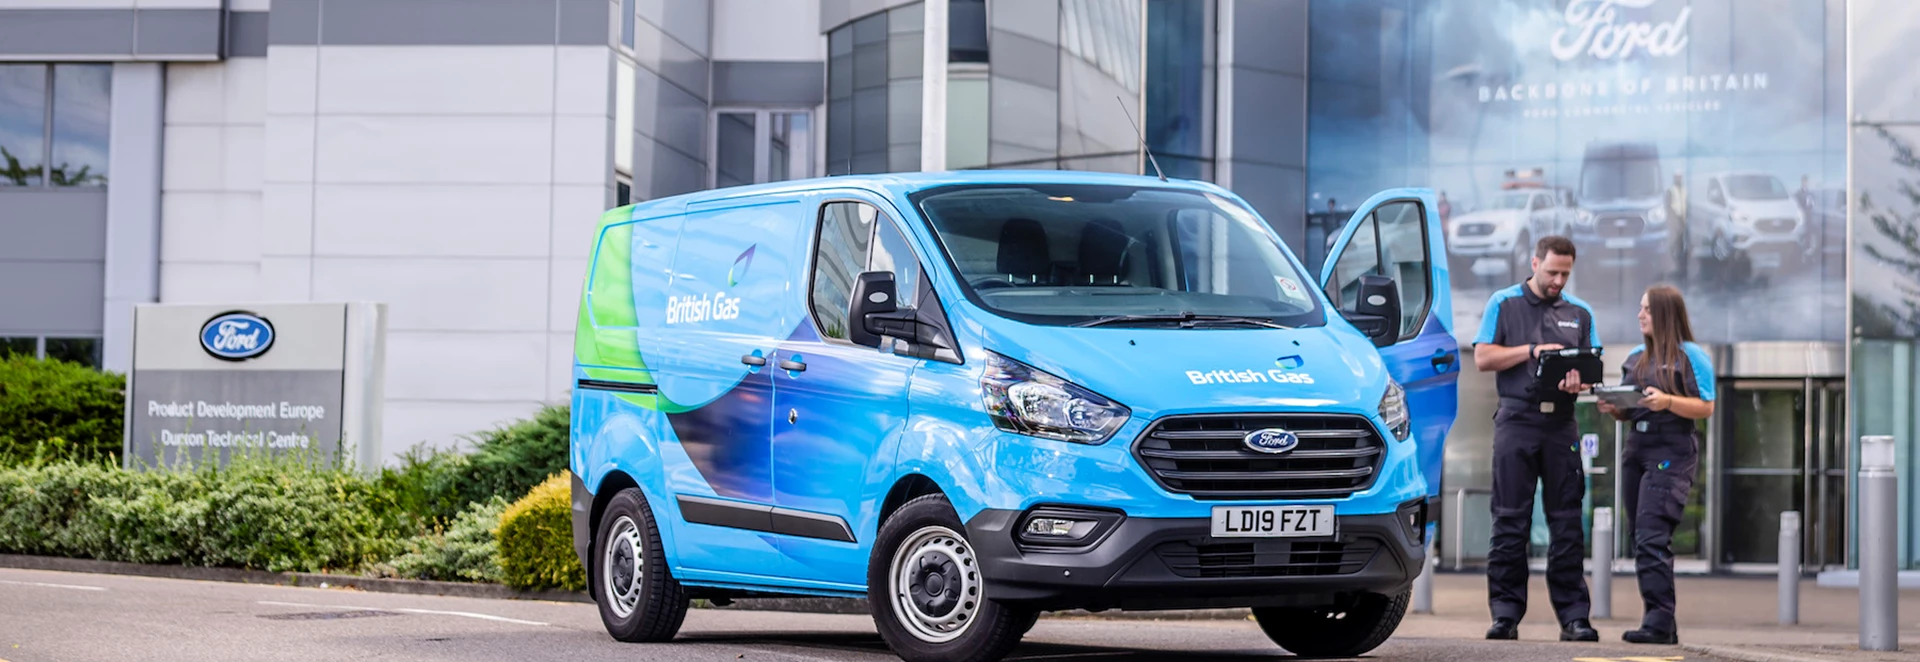 Ford teams up with Centrica to build infrastructure for new wave of EVs